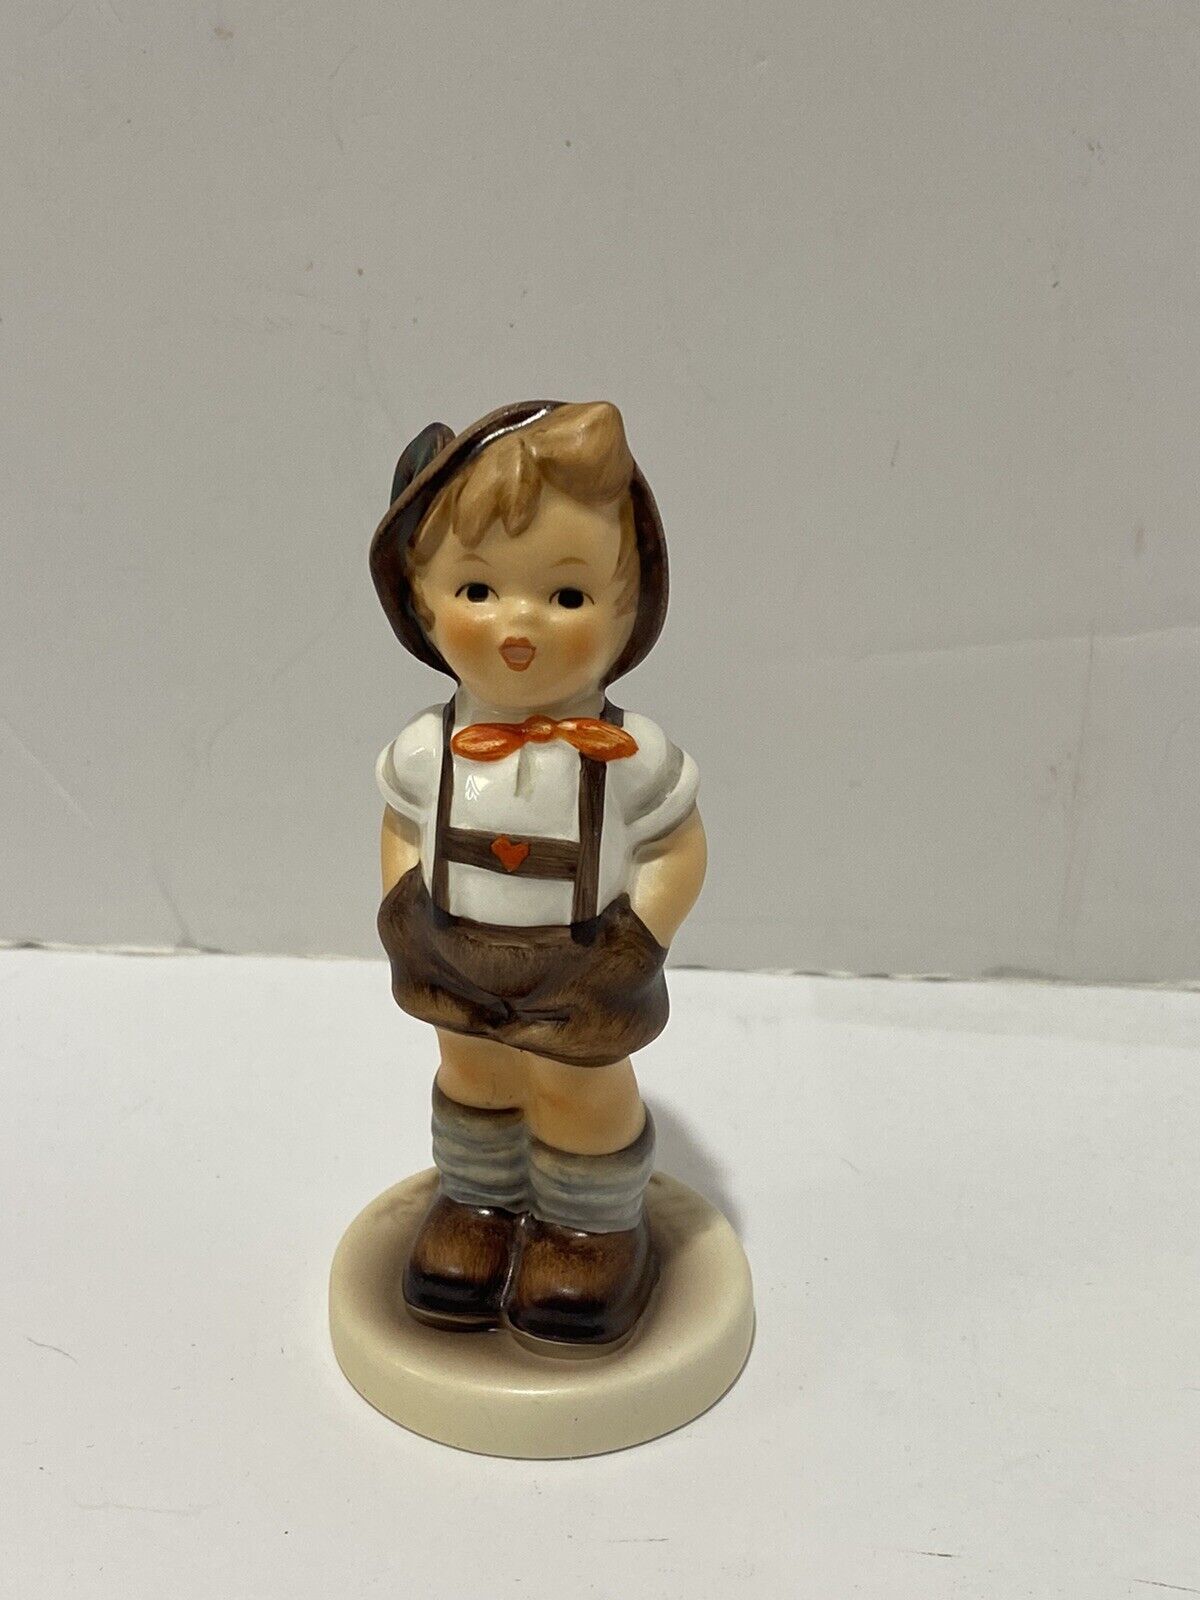 Hummel “for keeps” hand painted figurine #620, 3.5 in tall